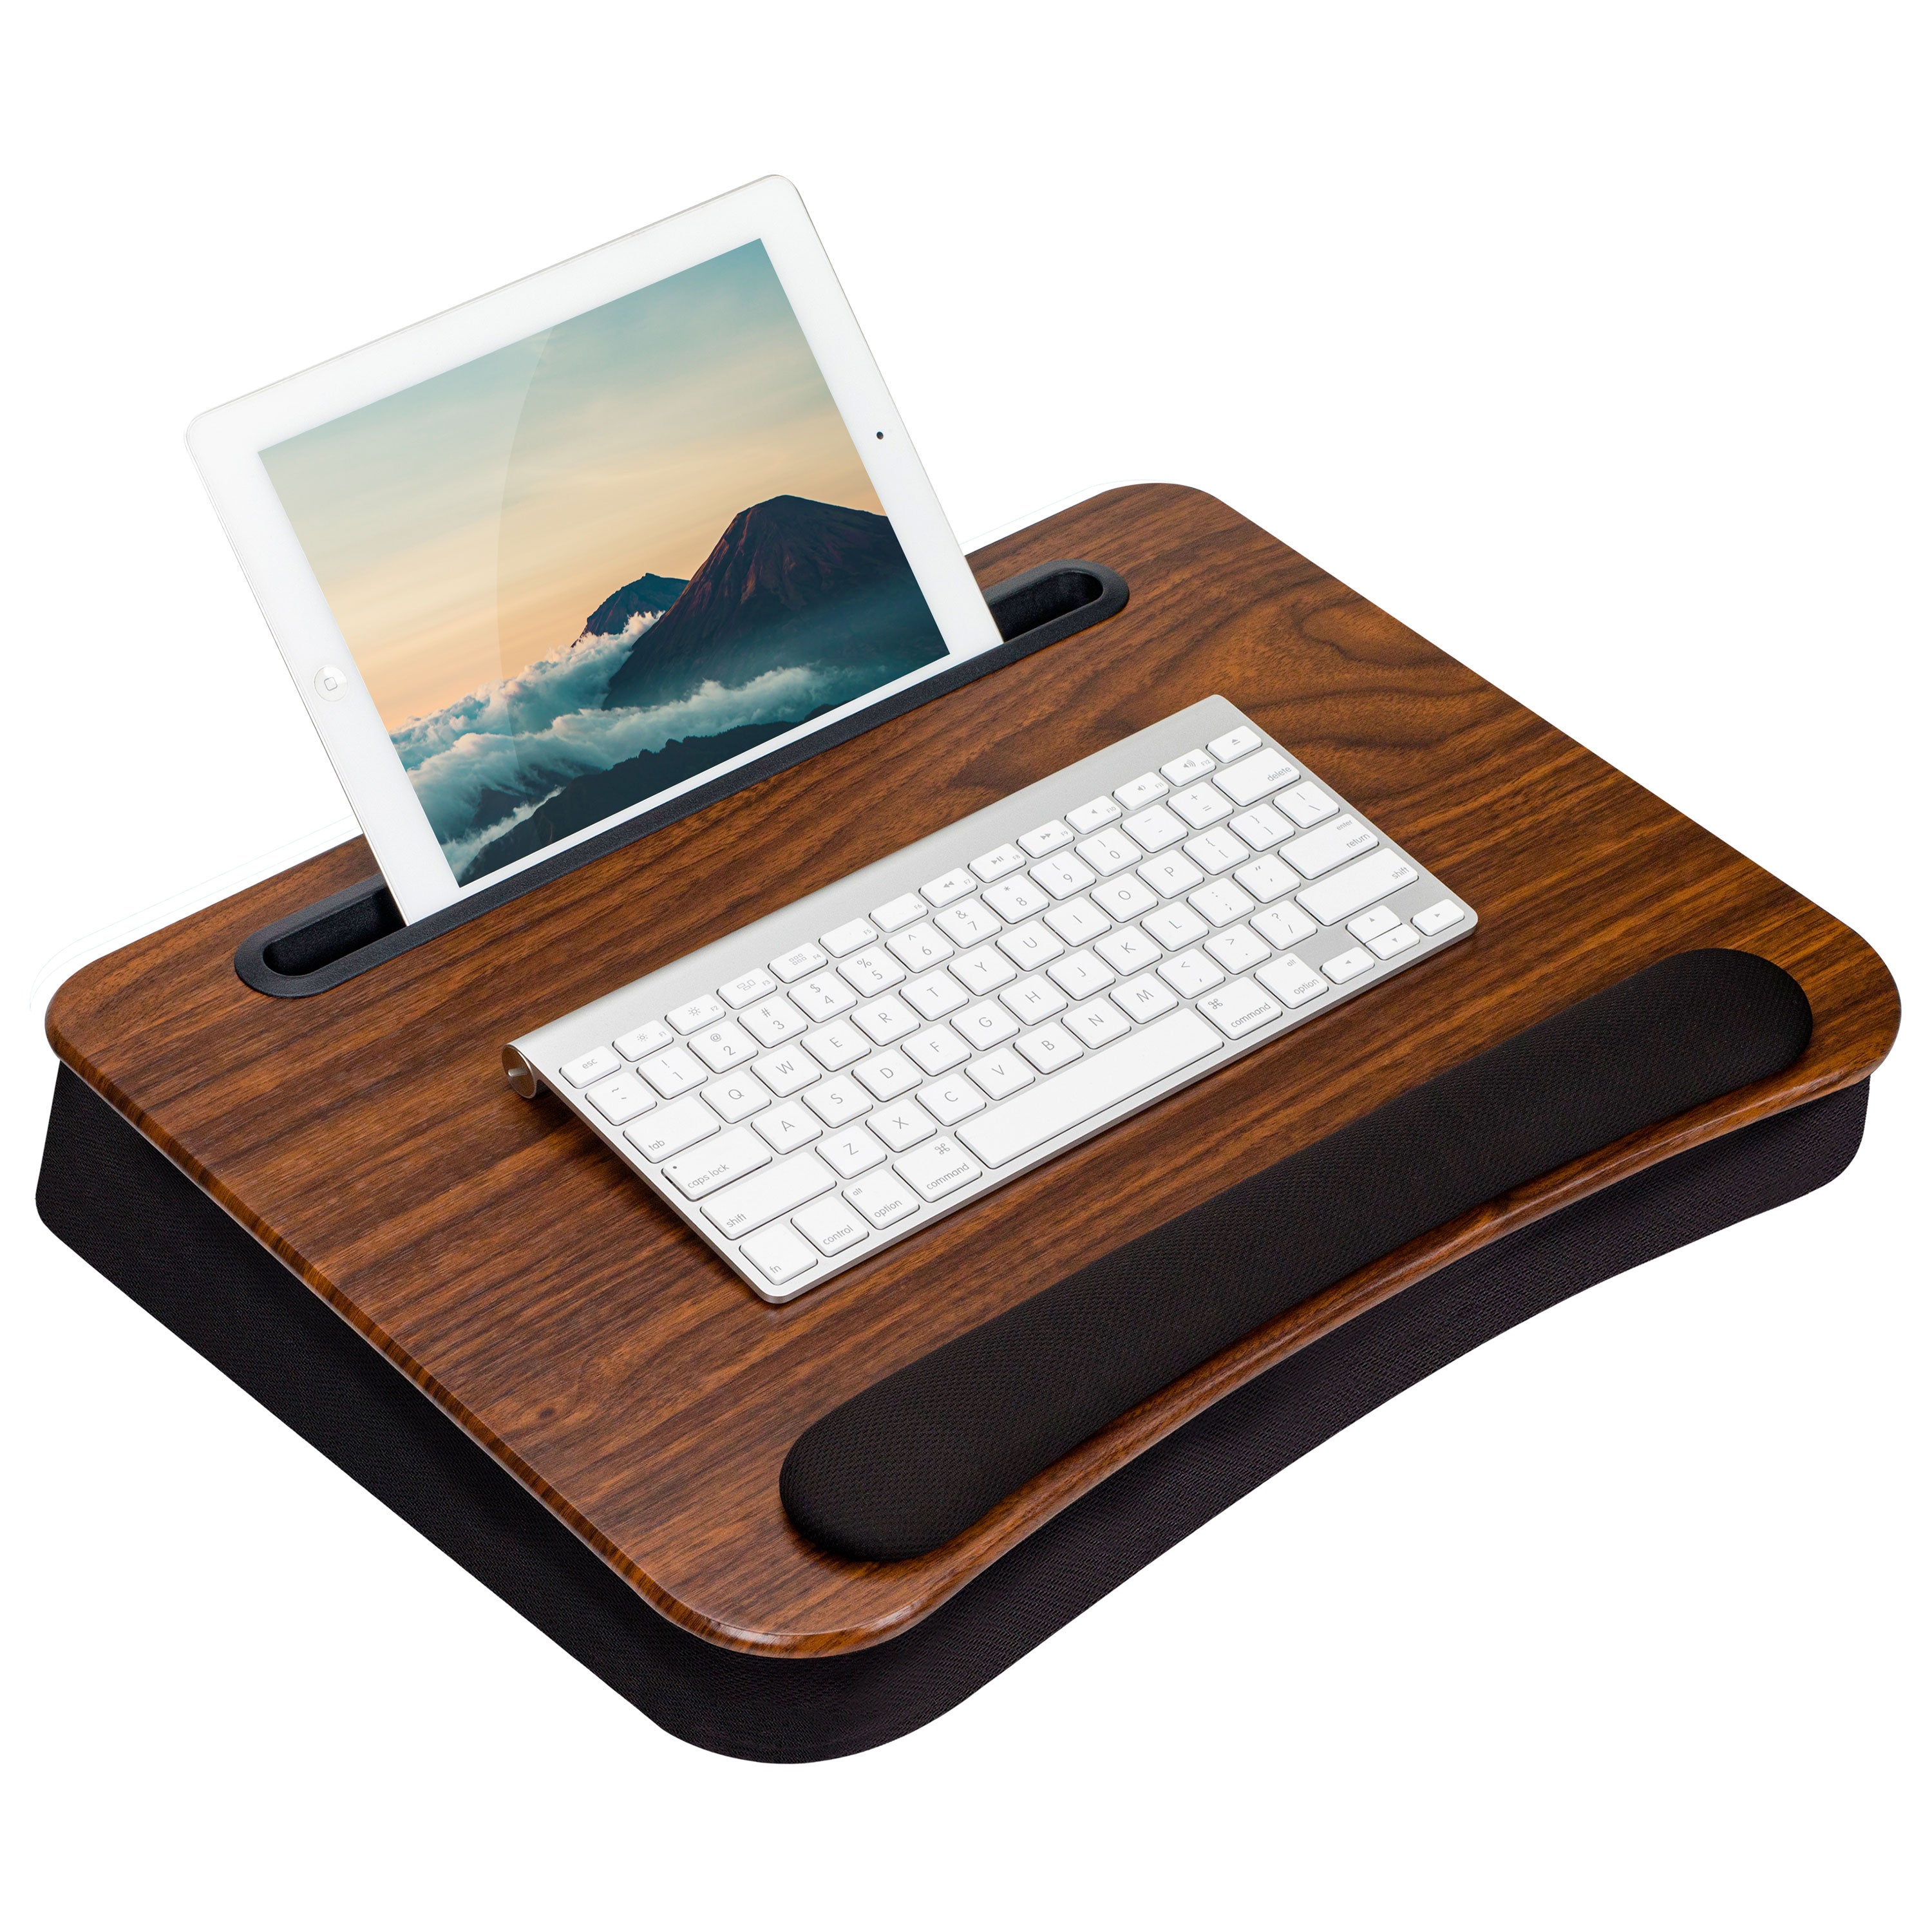  Large Lap Laptop Desk - Portable LapDesk with Mouse Pad & Wrist  Rest for Notebook, MacBook, Tablet, Bed, Sofa, Working, Writing,  Drawing(Wood Black, Fit Up to 17.3-in Laptops) : Office Products